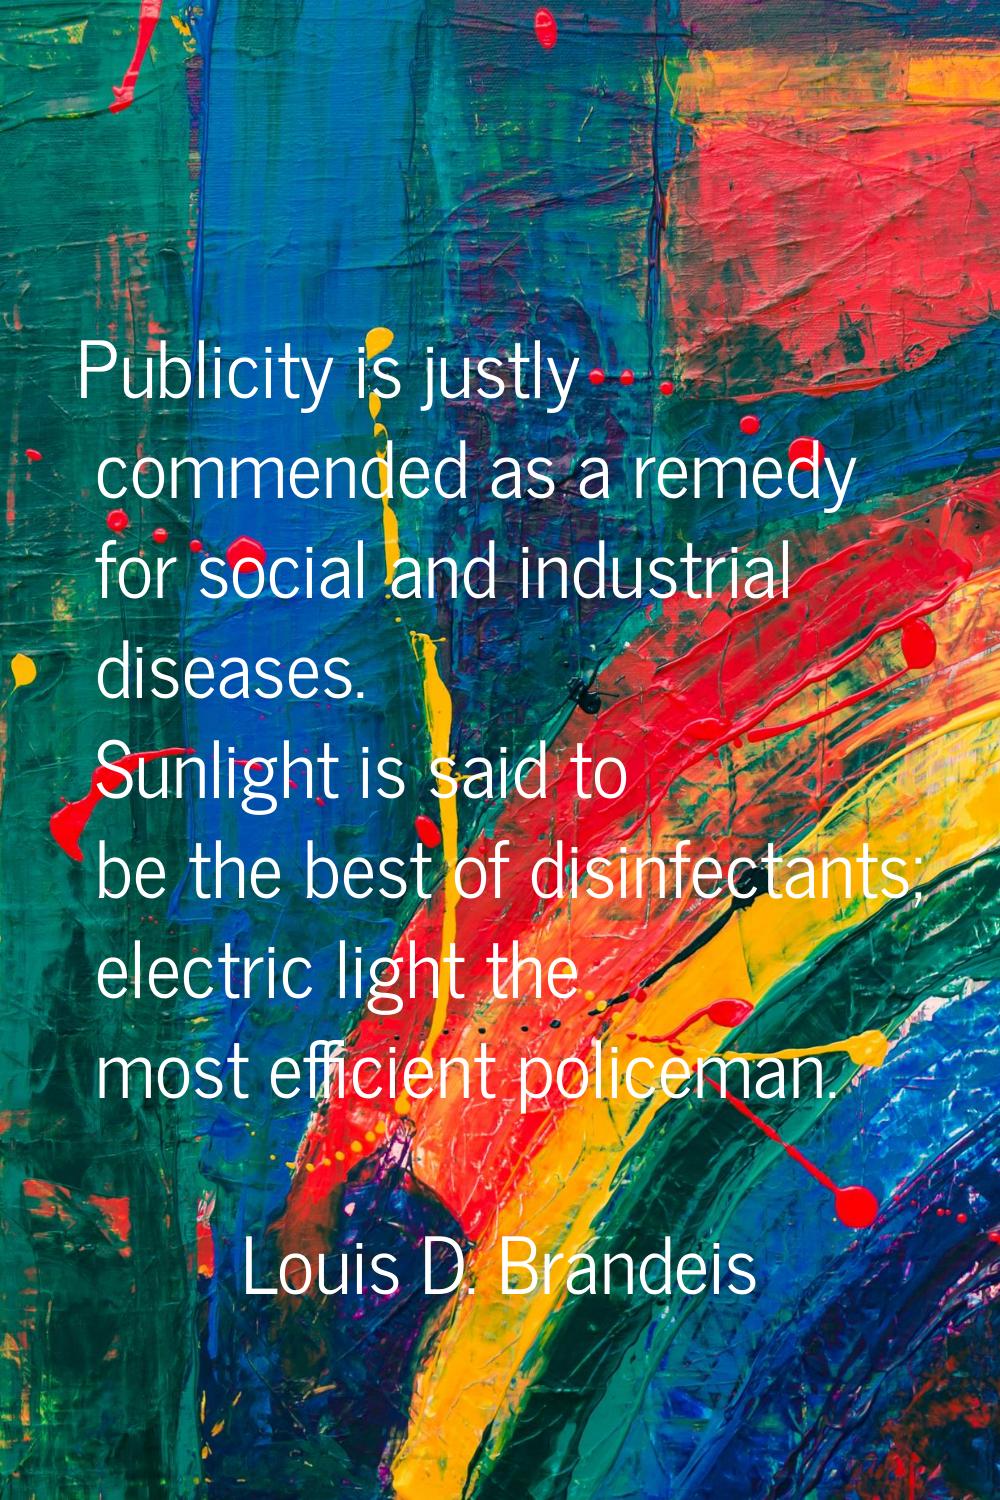 Publicity is justly commended as a remedy for social and industrial diseases. Sunlight is said to b